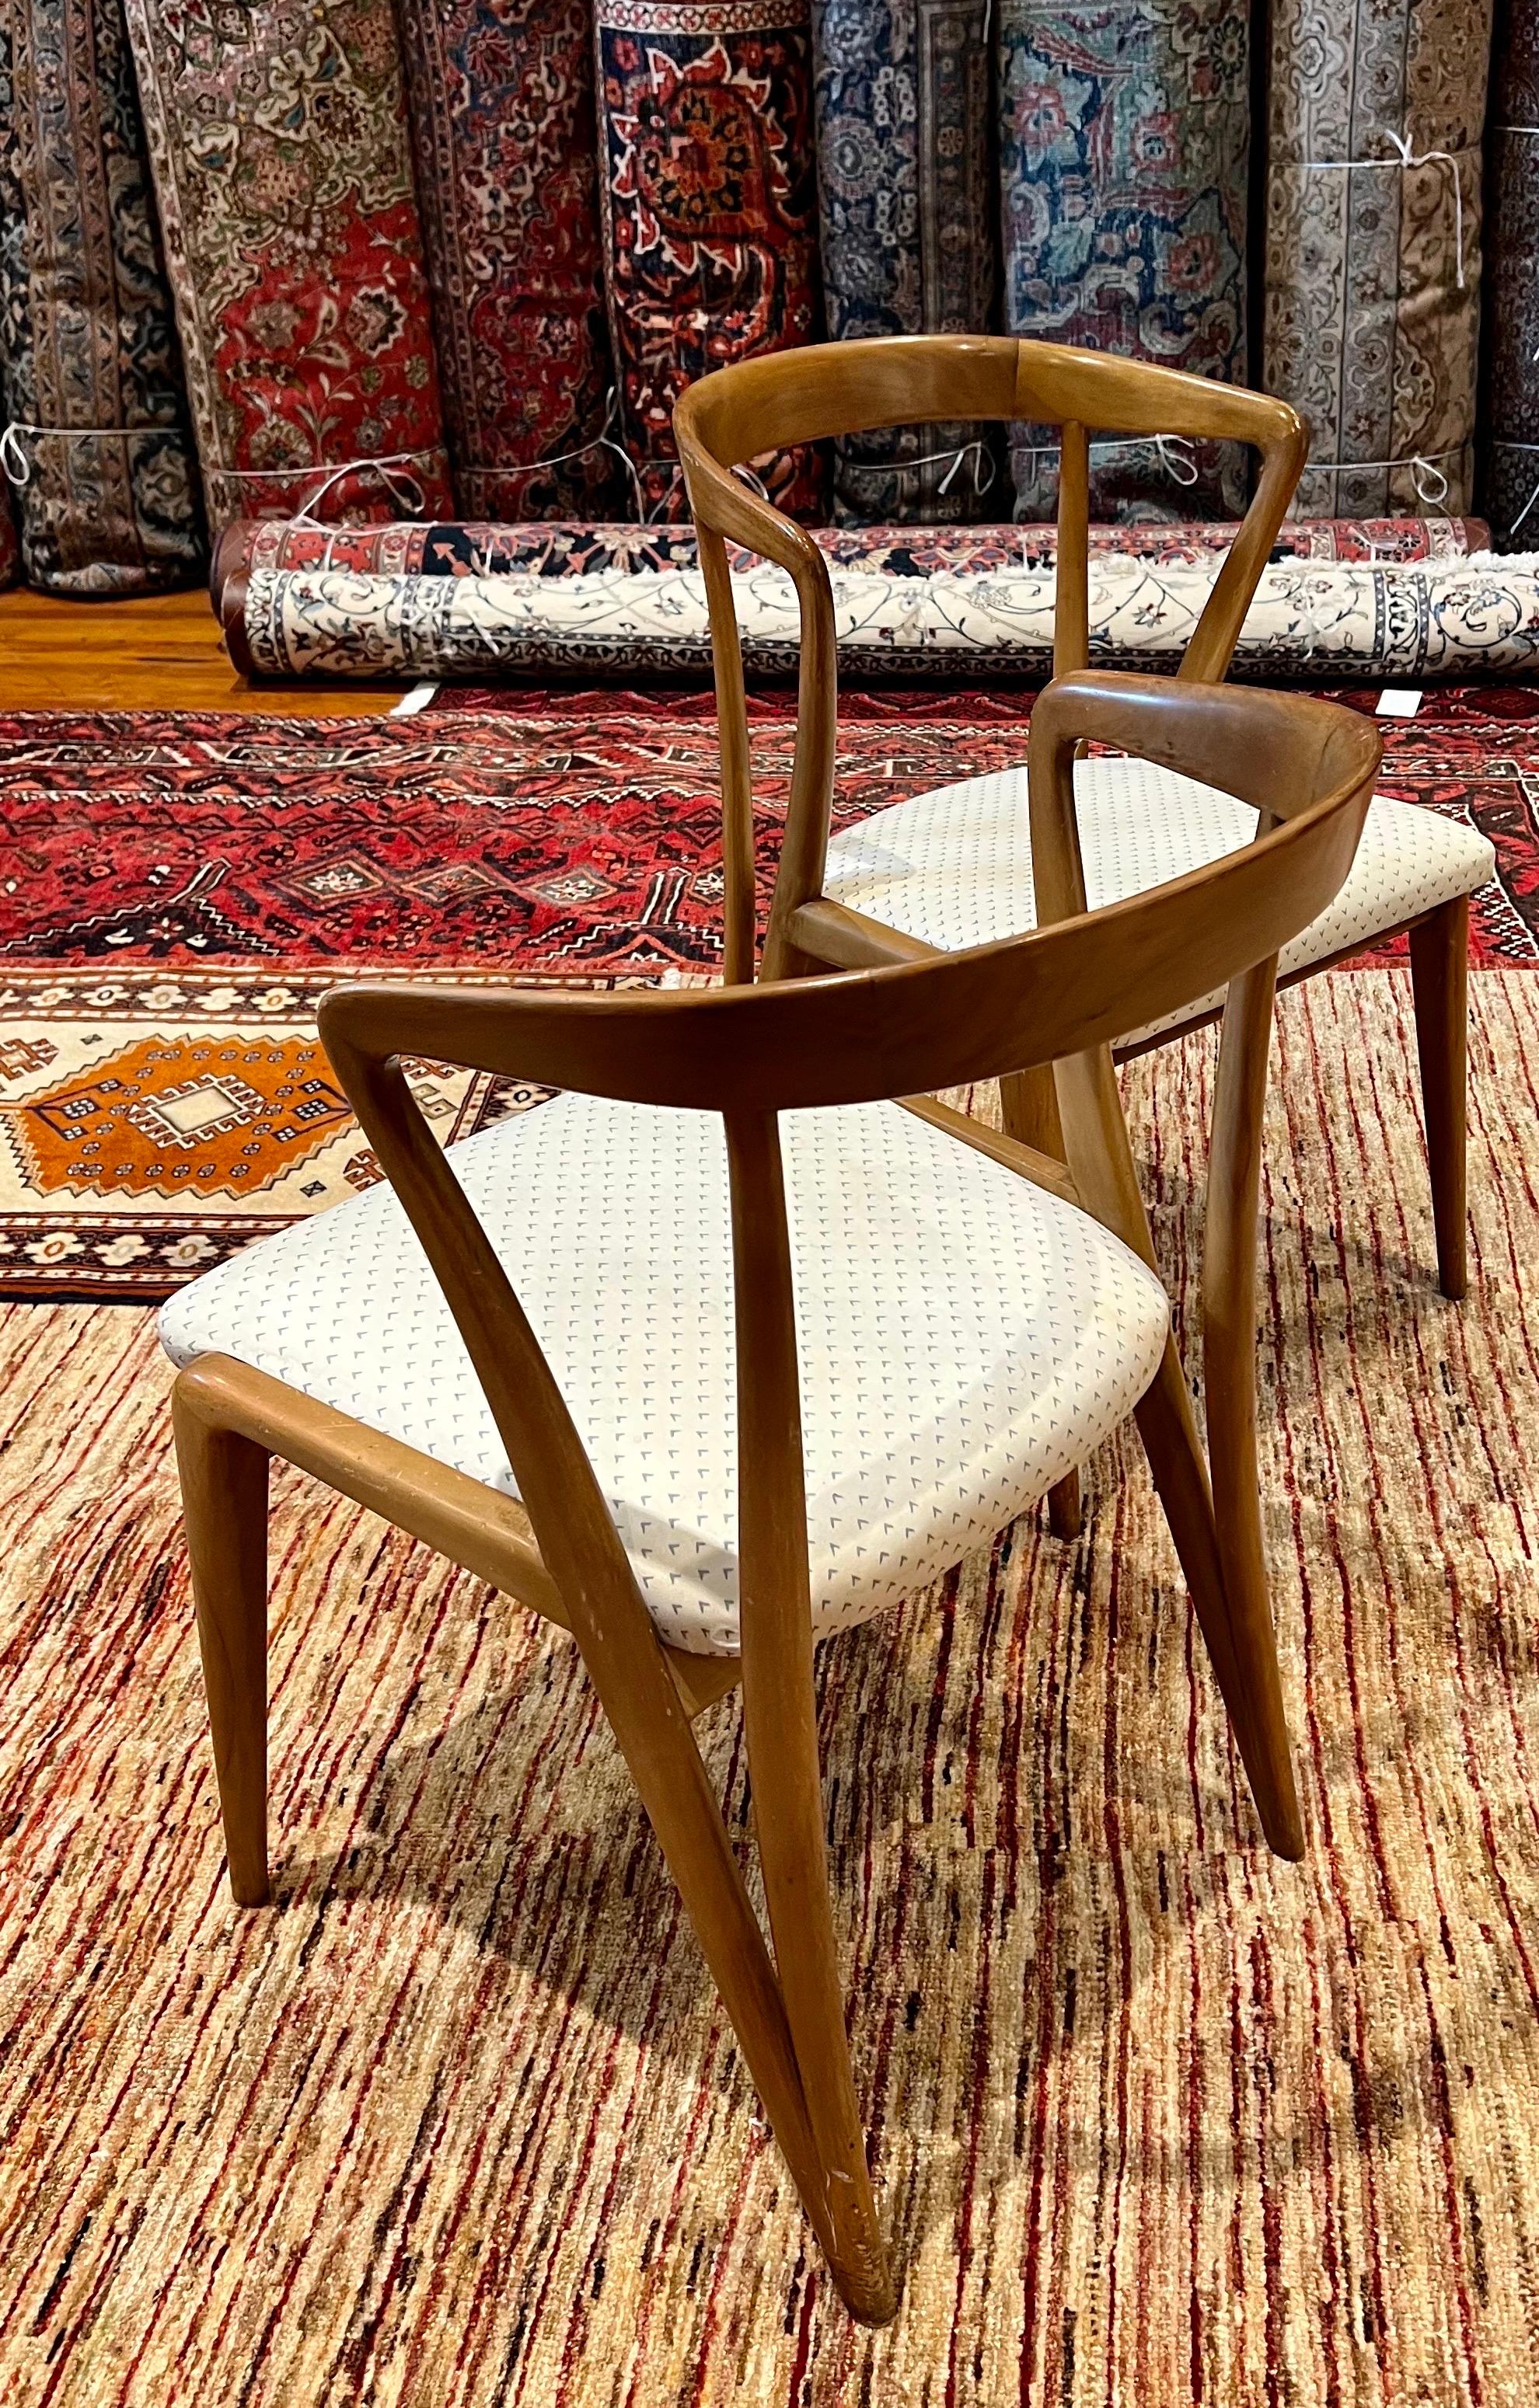 Beautiful and elegant pair of chairs designed by Bertha Schaefer for Singer & Sons, original finish recovered in cloth fabric. the chairs are sold in its original condition we have cleaned and oiled it nice clean condition.